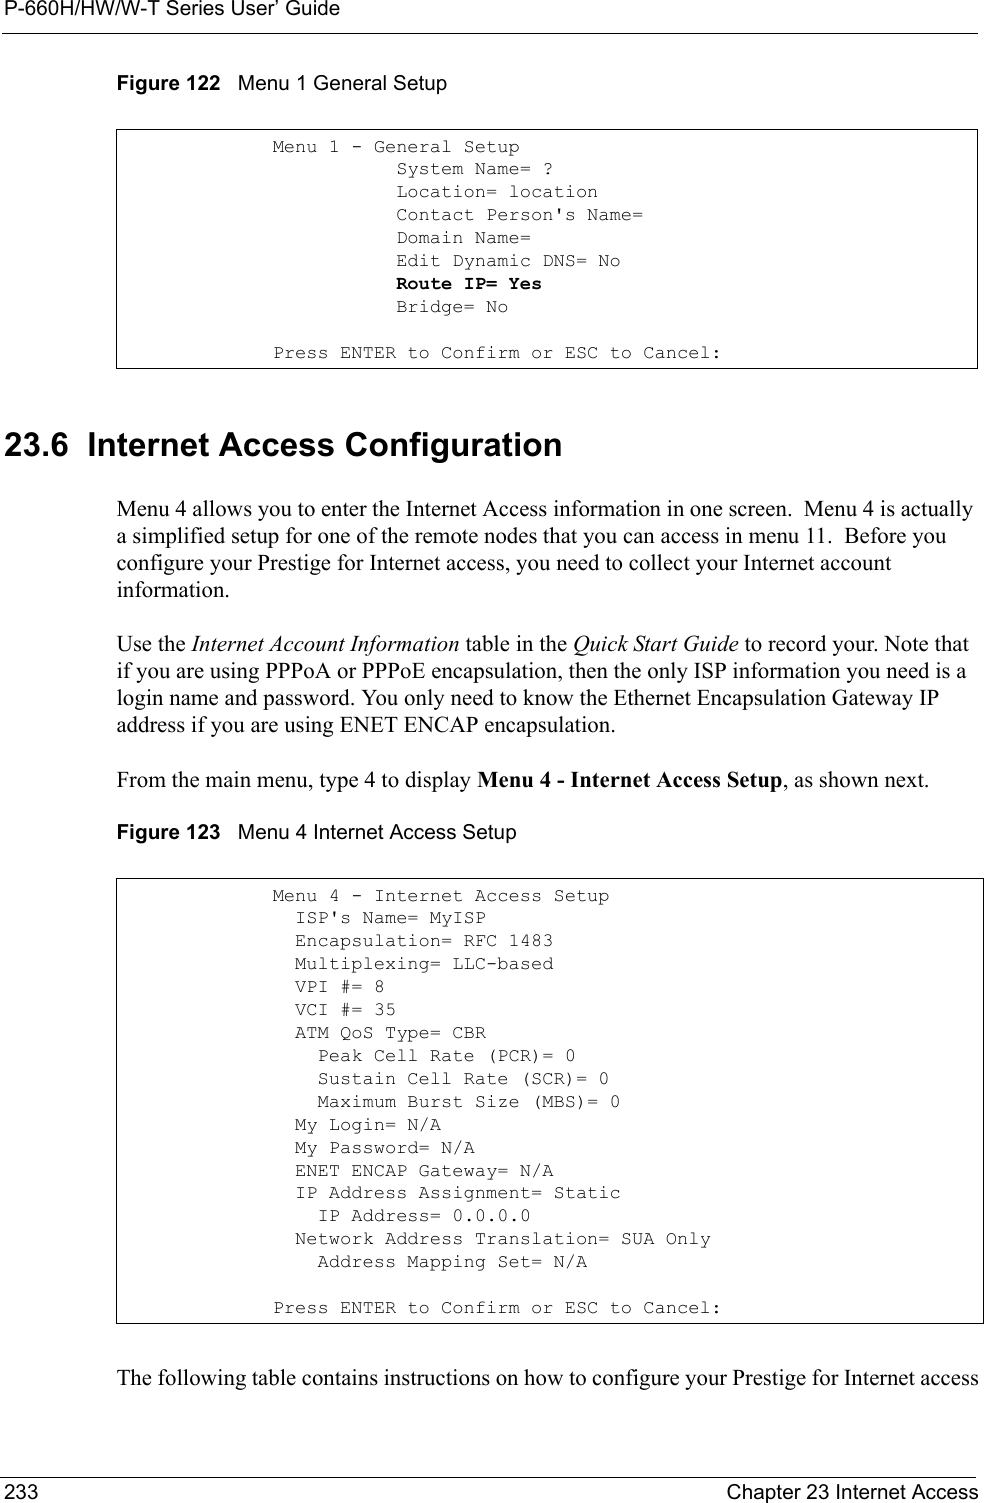 P-660H/HW/W-T Series User’ Guide233 Chapter 23 Internet AccessFigure 122   Menu 1 General Setup23.6  Internet Access ConfigurationMenu 4 allows you to enter the Internet Access information in one screen.  Menu 4 is actually a simplified setup for one of the remote nodes that you can access in menu 11.  Before you configure your Prestige for Internet access, you need to collect your Internet account information.Use the Internet Account Information table in the Quick Start Guide to record your. Note that if you are using PPPoA or PPPoE encapsulation, then the only ISP information you need is a login name and password. You only need to know the Ethernet Encapsulation Gateway IP address if you are using ENET ENCAP encapsulation.From the main menu, type 4 to display Menu 4 - Internet Access Setup, as shown next. Figure 123   Menu 4 Internet Access SetupThe following table contains instructions on how to configure your Prestige for Internet accessMenu 1 - General Setup           System Name= ?           Location= location           Contact Person&apos;s Name=            Domain Name=           Edit Dynamic DNS= No           Route IP= Yes           Bridge= NoPress ENTER to Confirm or ESC to Cancel:Menu 4 - Internet Access Setup  ISP&apos;s Name= MyISP  Encapsulation= RFC 1483  Multiplexing= LLC-based  VPI #= 8  VCI #= 35  ATM QoS Type= CBR    Peak Cell Rate (PCR)= 0    Sustain Cell Rate (SCR)= 0    Maximum Burst Size (MBS)= 0  My Login= N/A  My Password= N/A  ENET ENCAP Gateway= N/A  IP Address Assignment= Static    IP Address= 0.0.0.0  Network Address Translation= SUA Only    Address Mapping Set= N/APress ENTER to Confirm or ESC to Cancel: